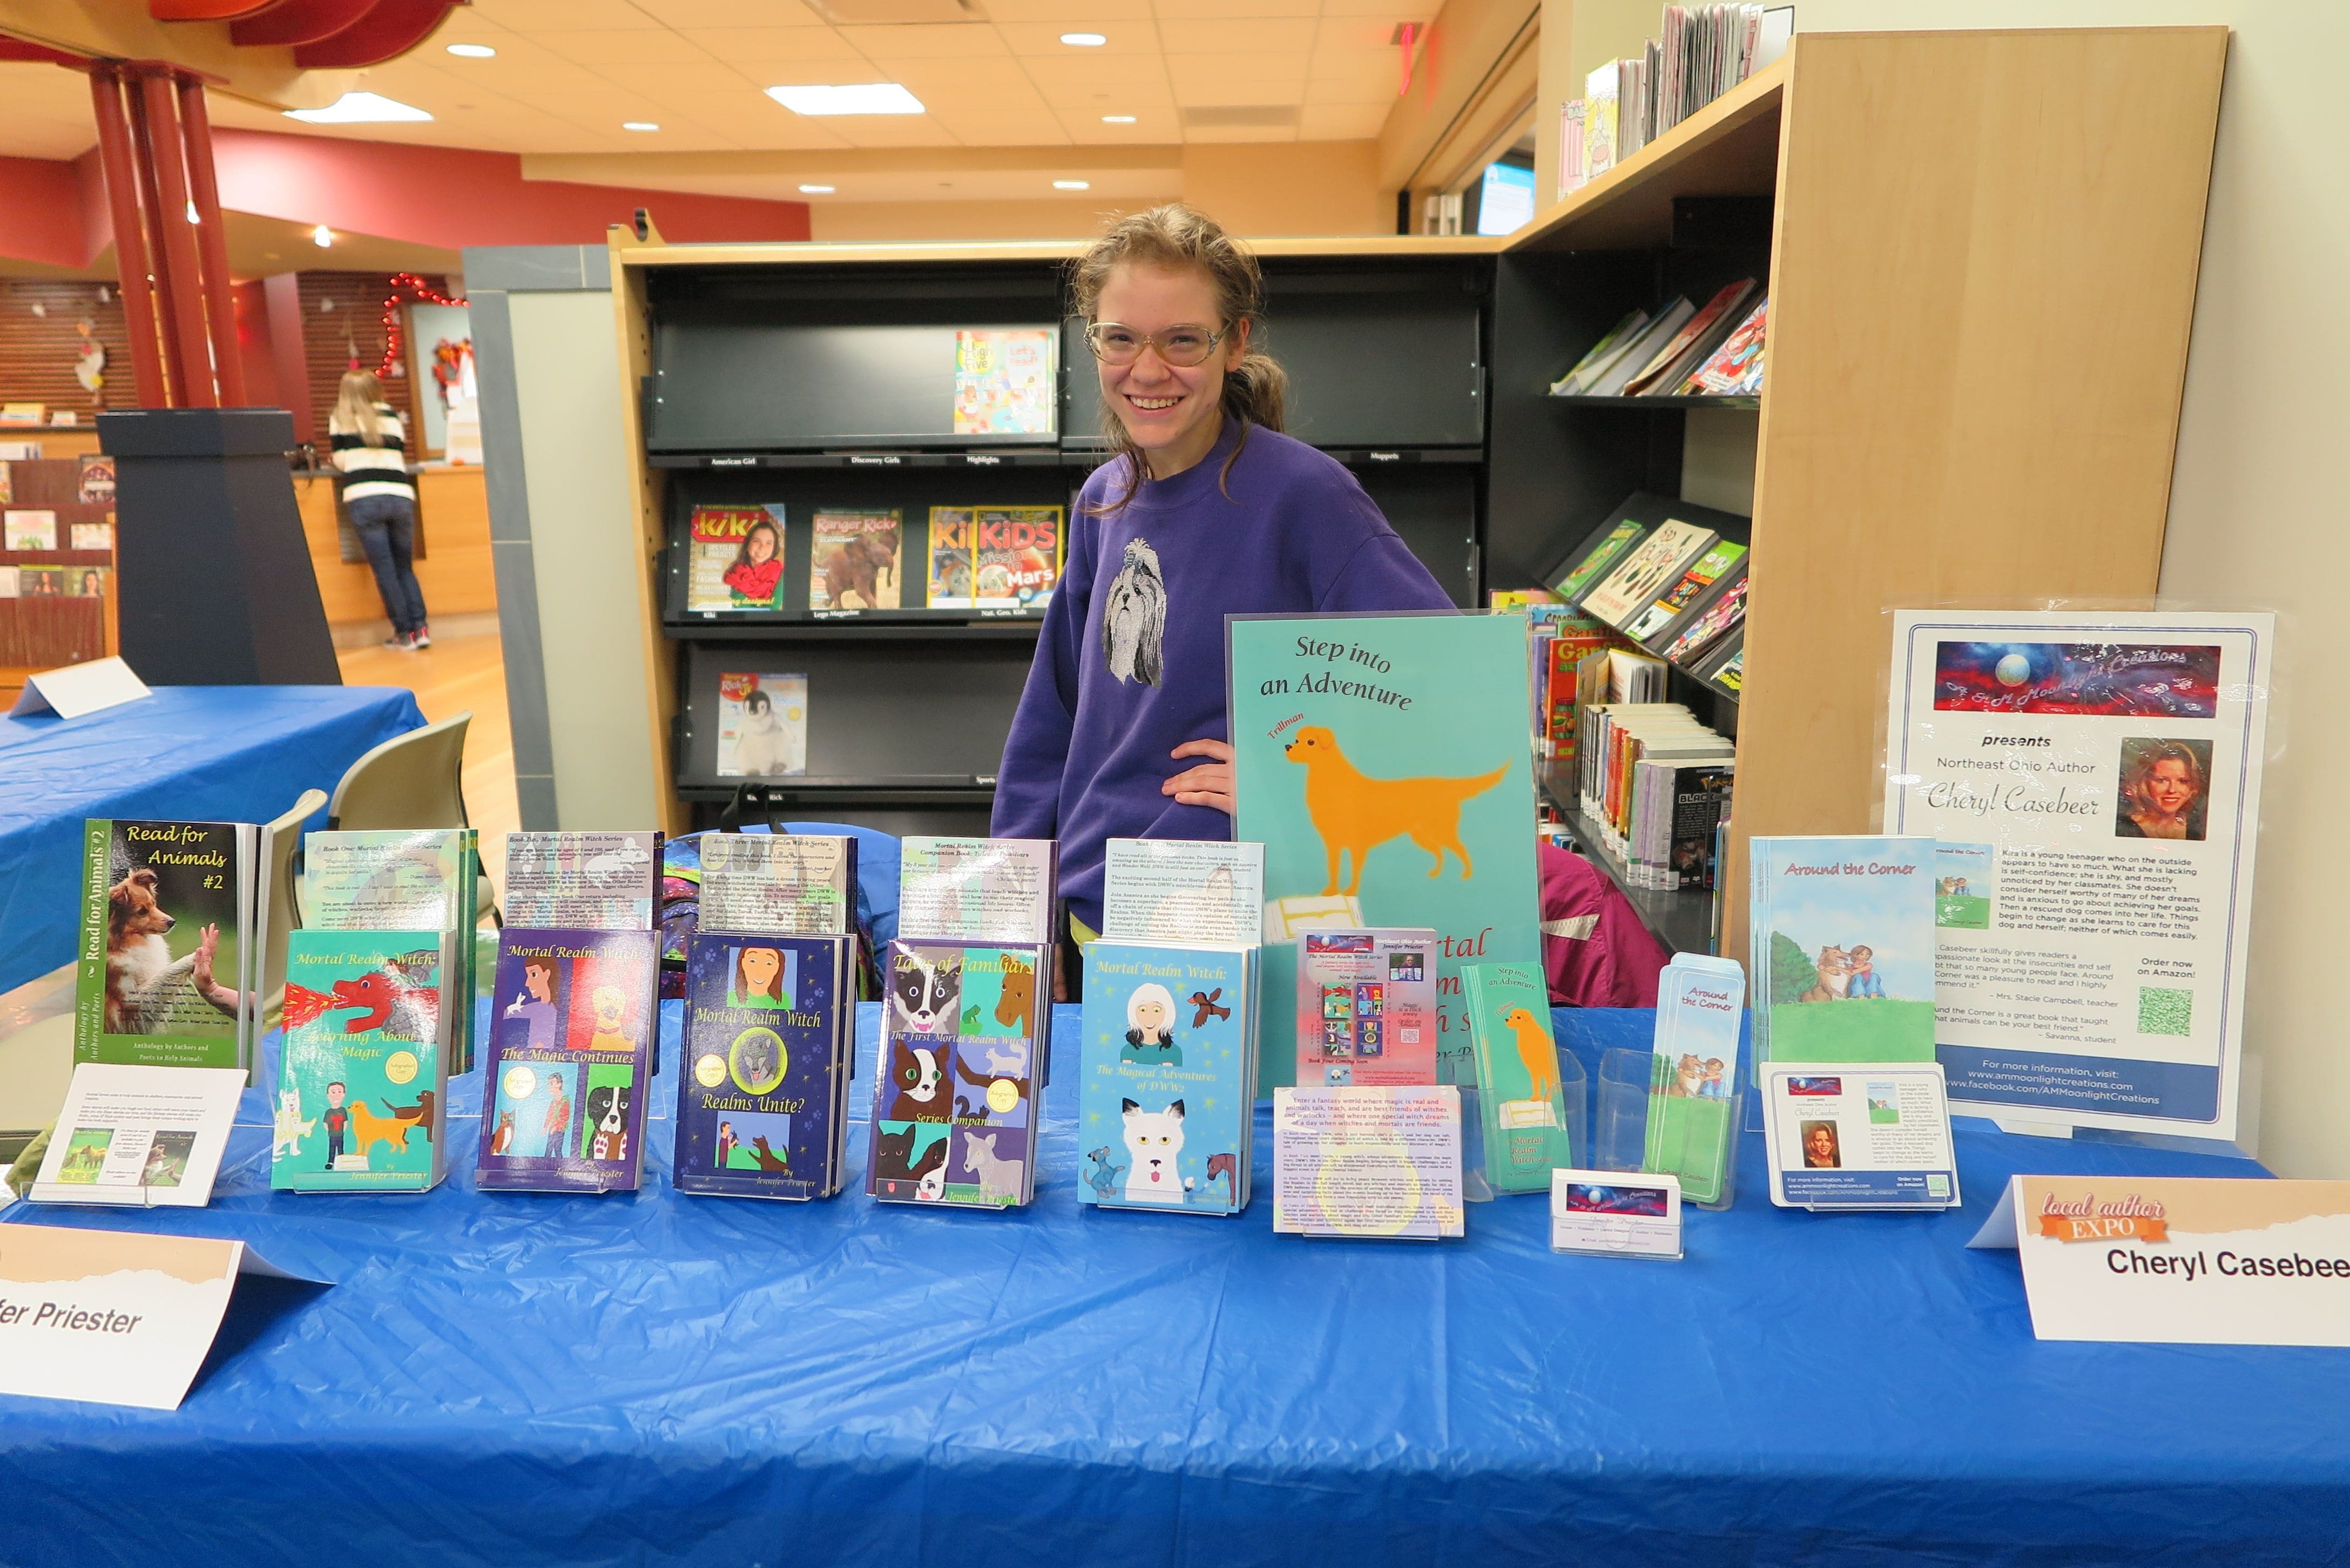 Jennifer Priester with her books at a library author event.